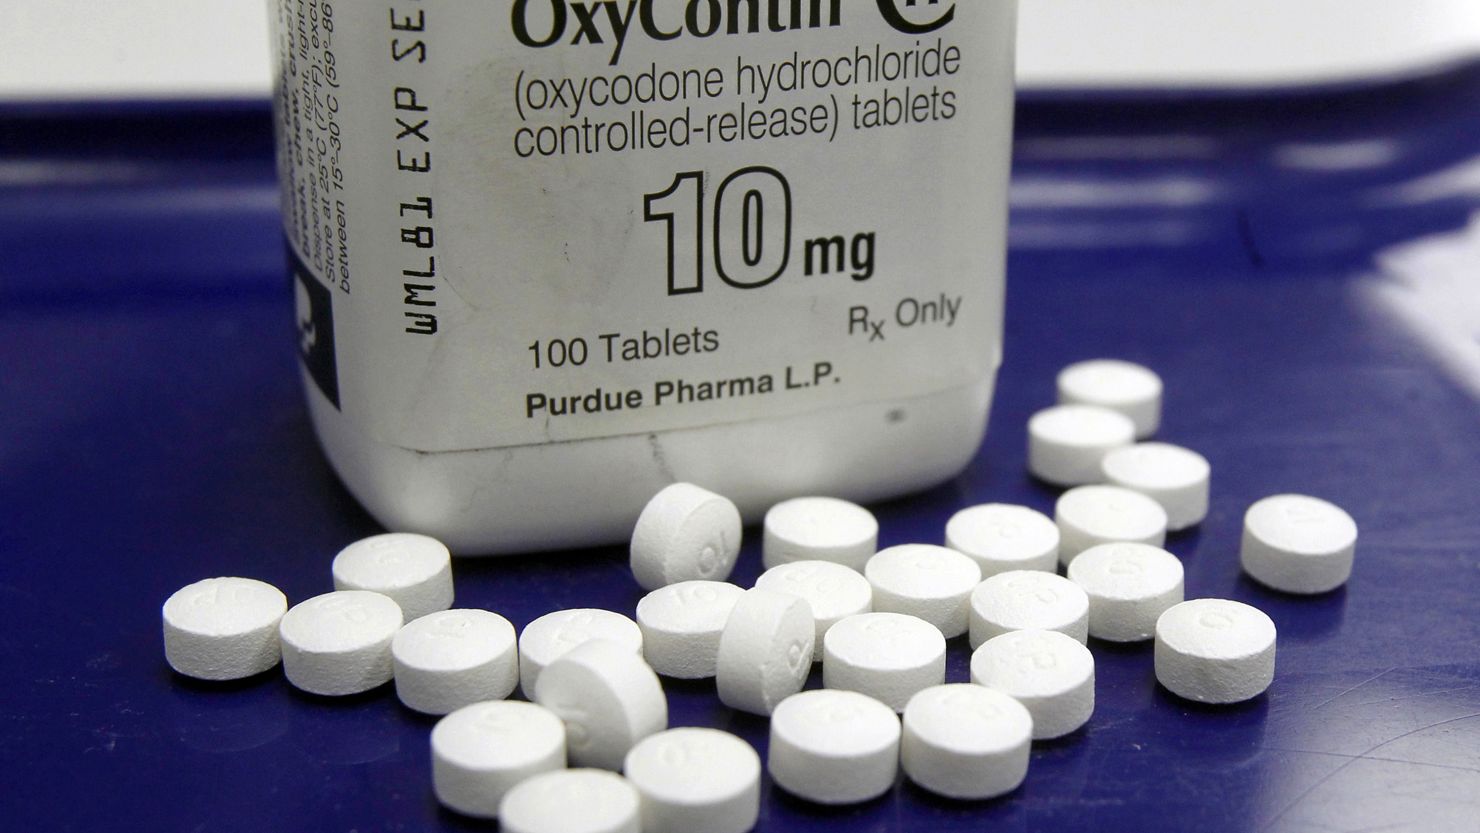 OxyContin pills arranged for a 2013 photo at a pharmacy, in Montpelier, Vermont.